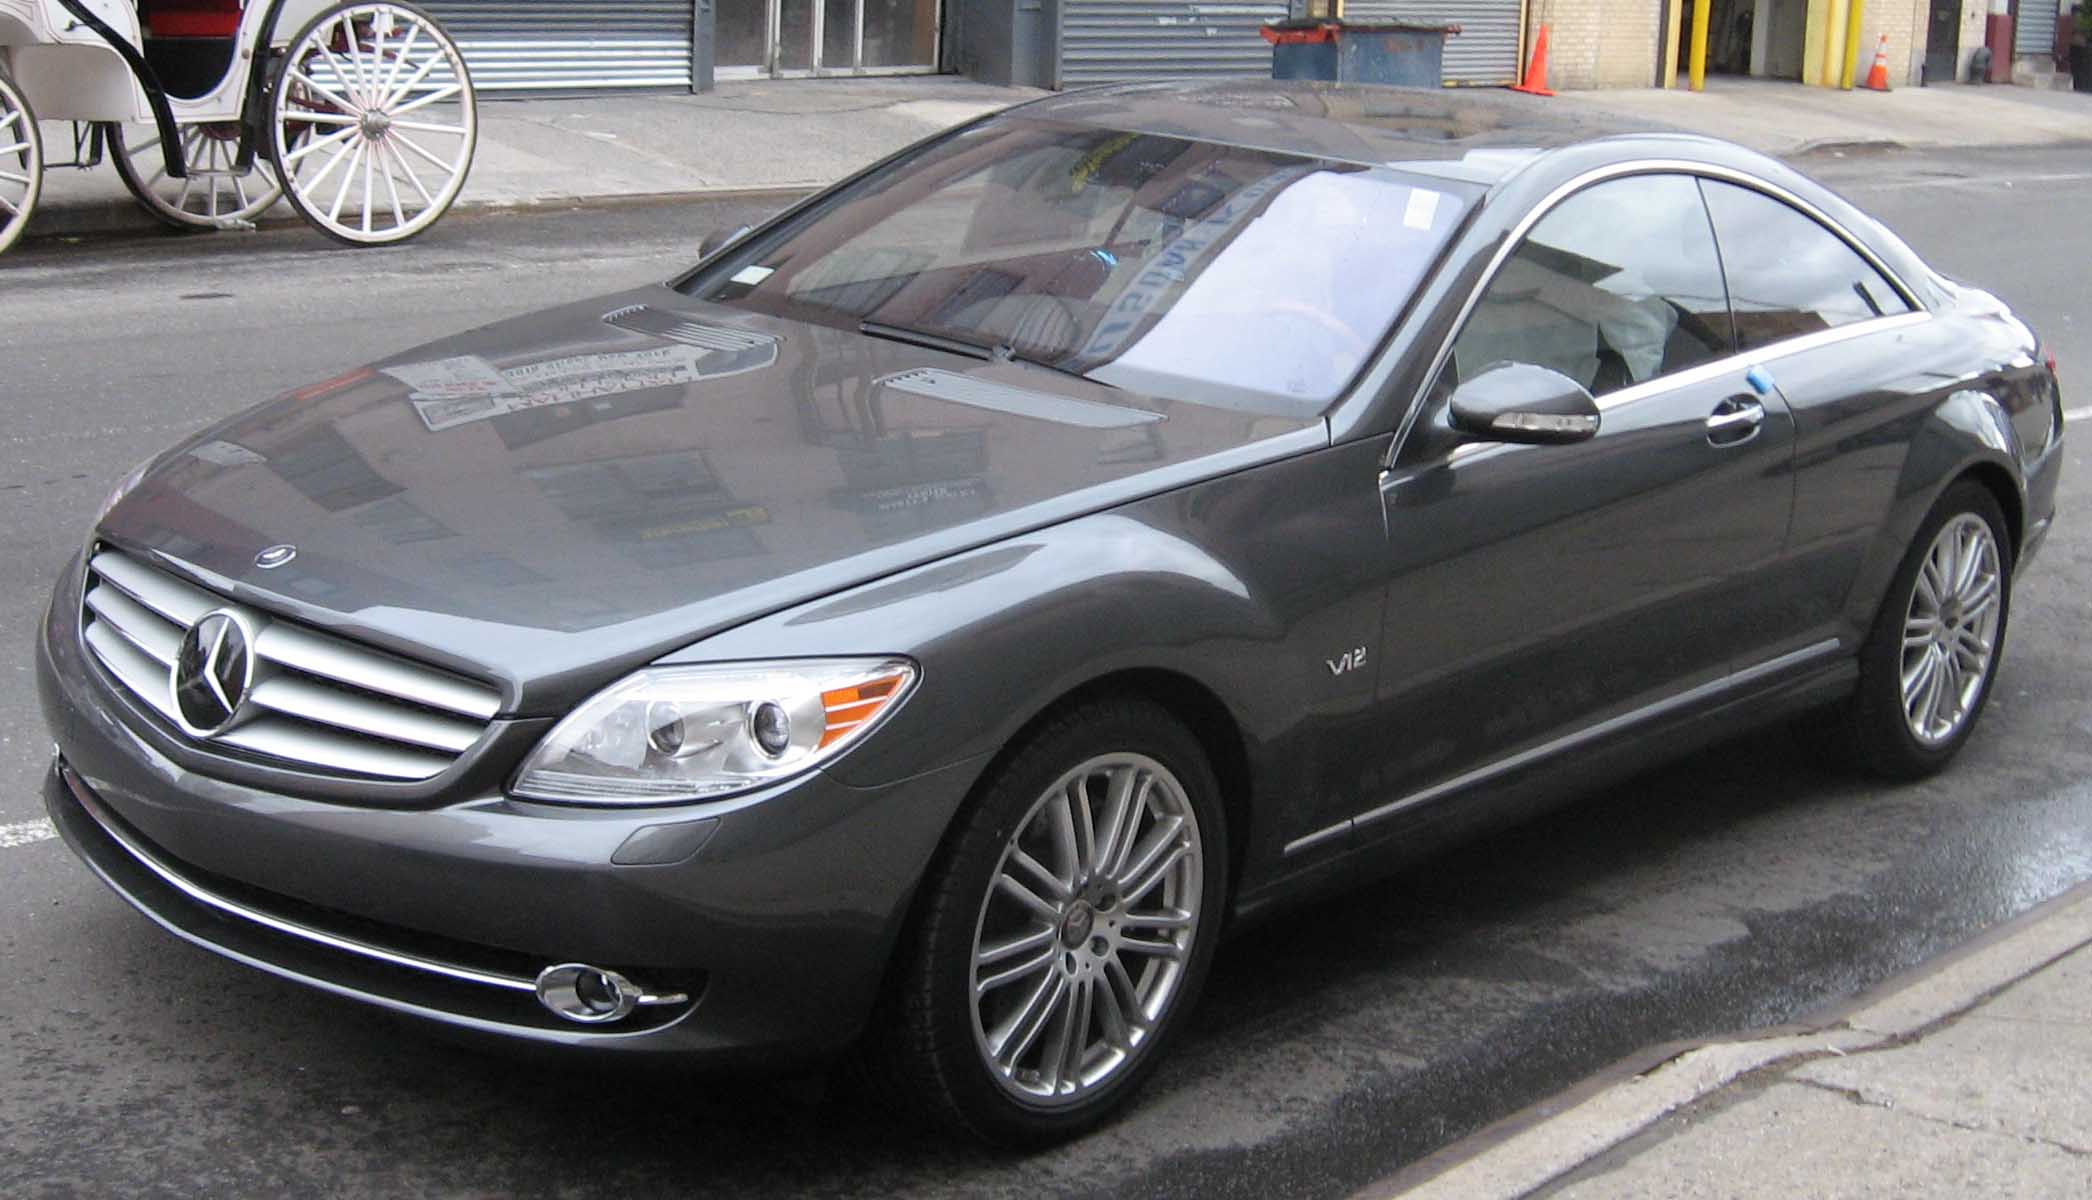 mercedes-benz cl 600 coupe-pic. 2